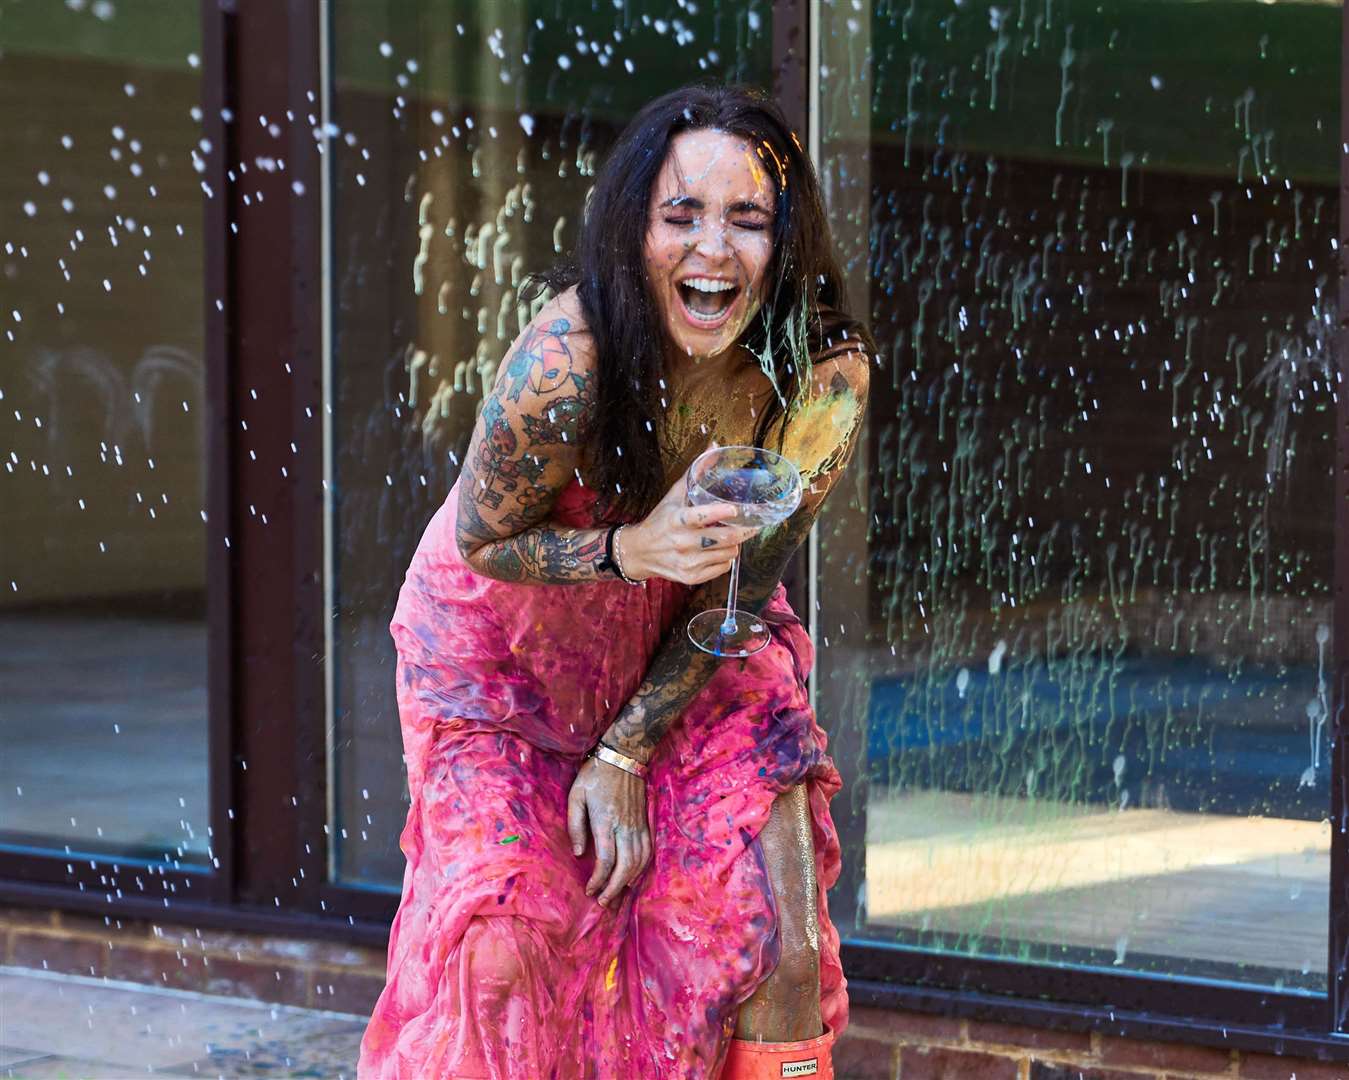 Anna O'Neill celebrated her divorce with a paint fight with her friends. Picture: Ian Lim, www.milianeyes.com